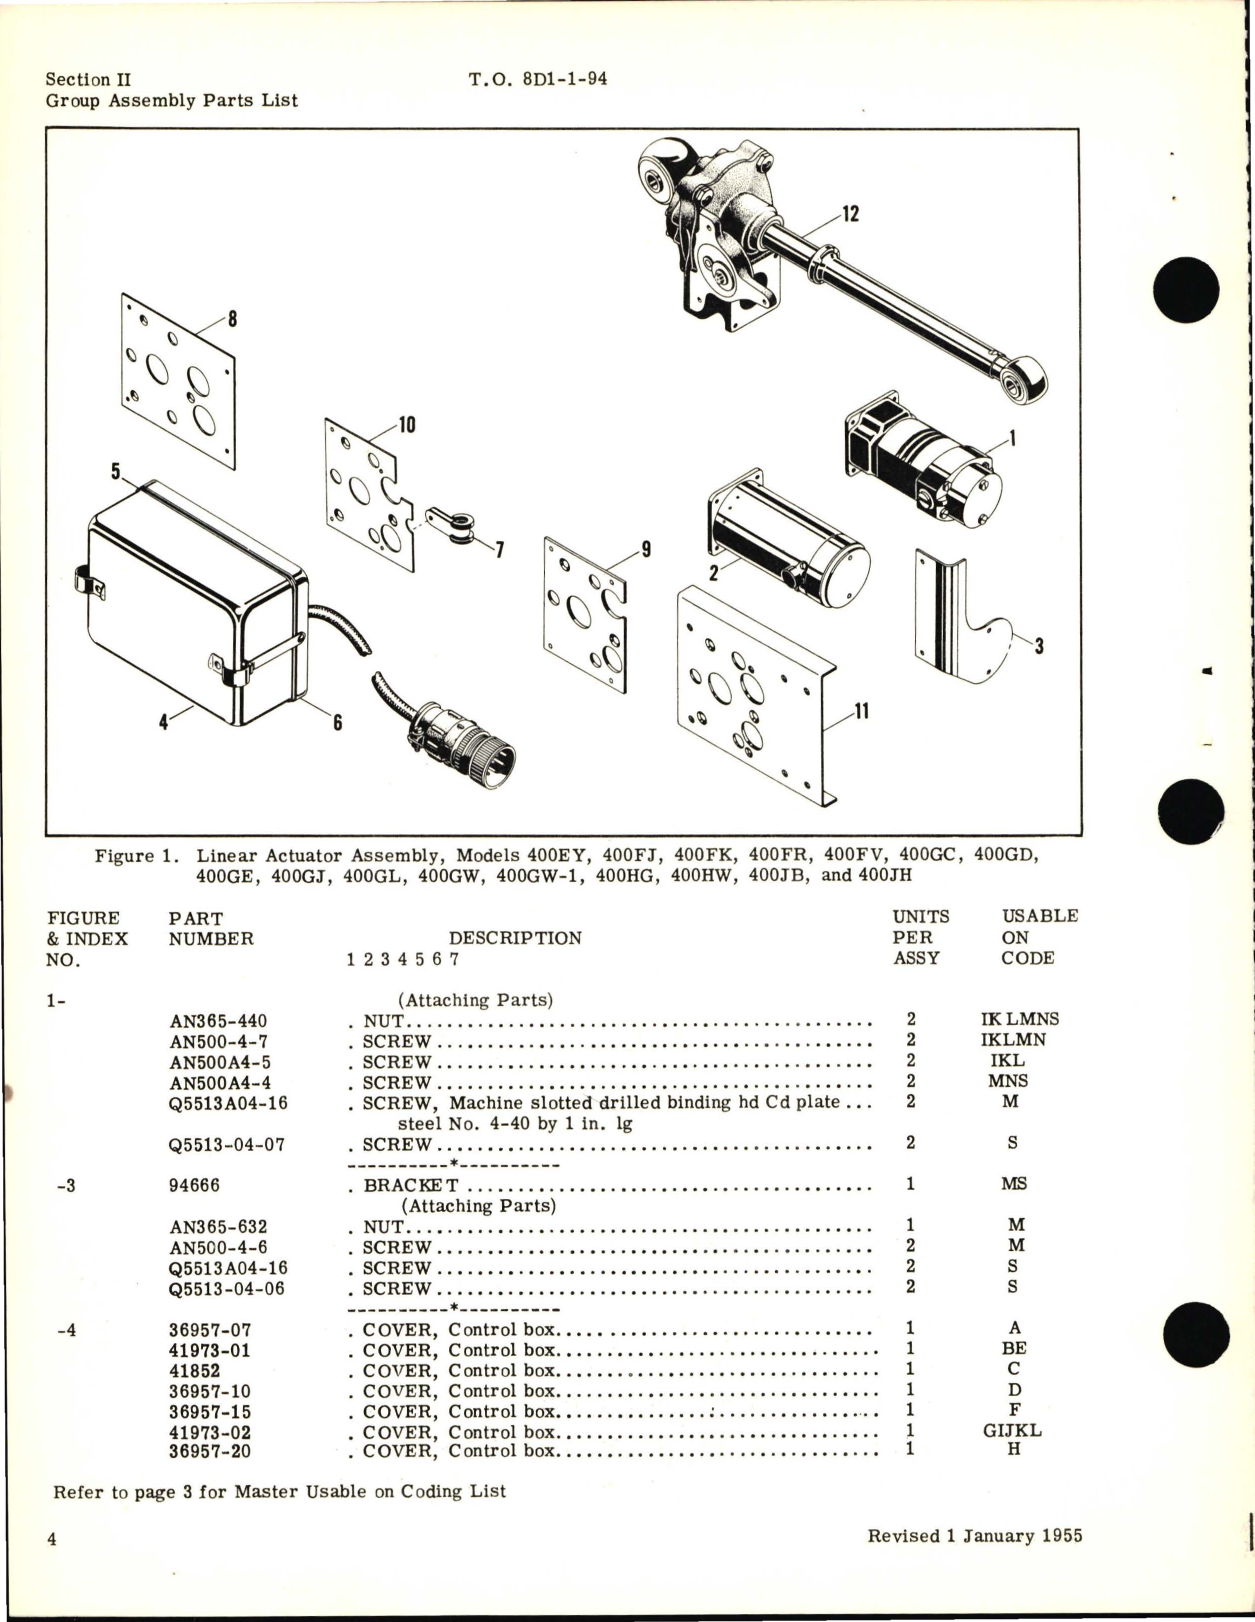 Sample page 8 from AirCorps Library document: Illustrated Parts Breakdown for Linear Actuator Assembly 400 Series